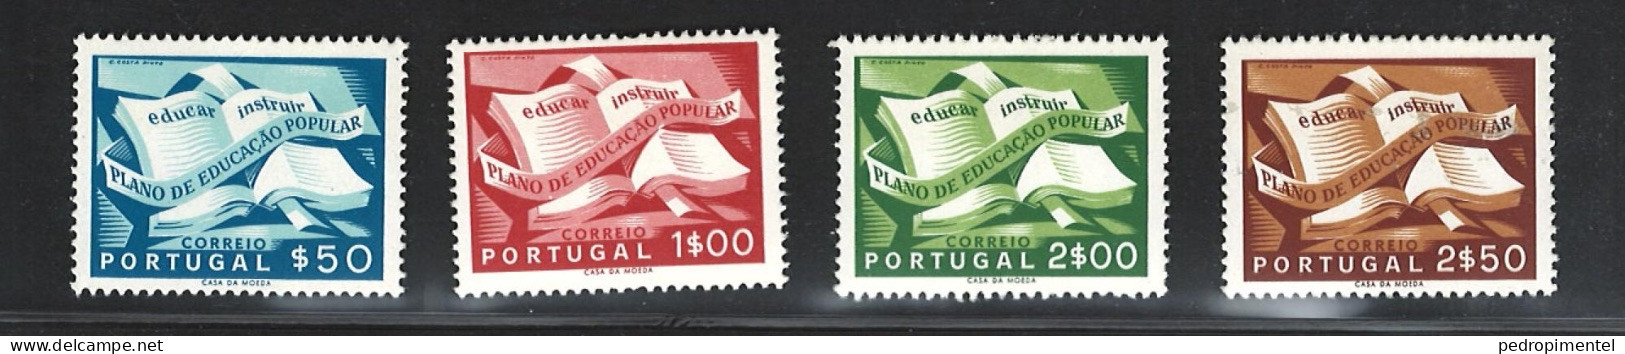 Portugal Stamps 1954 "Popular Education Plan" Condition MNH #796-799 - Nuevos